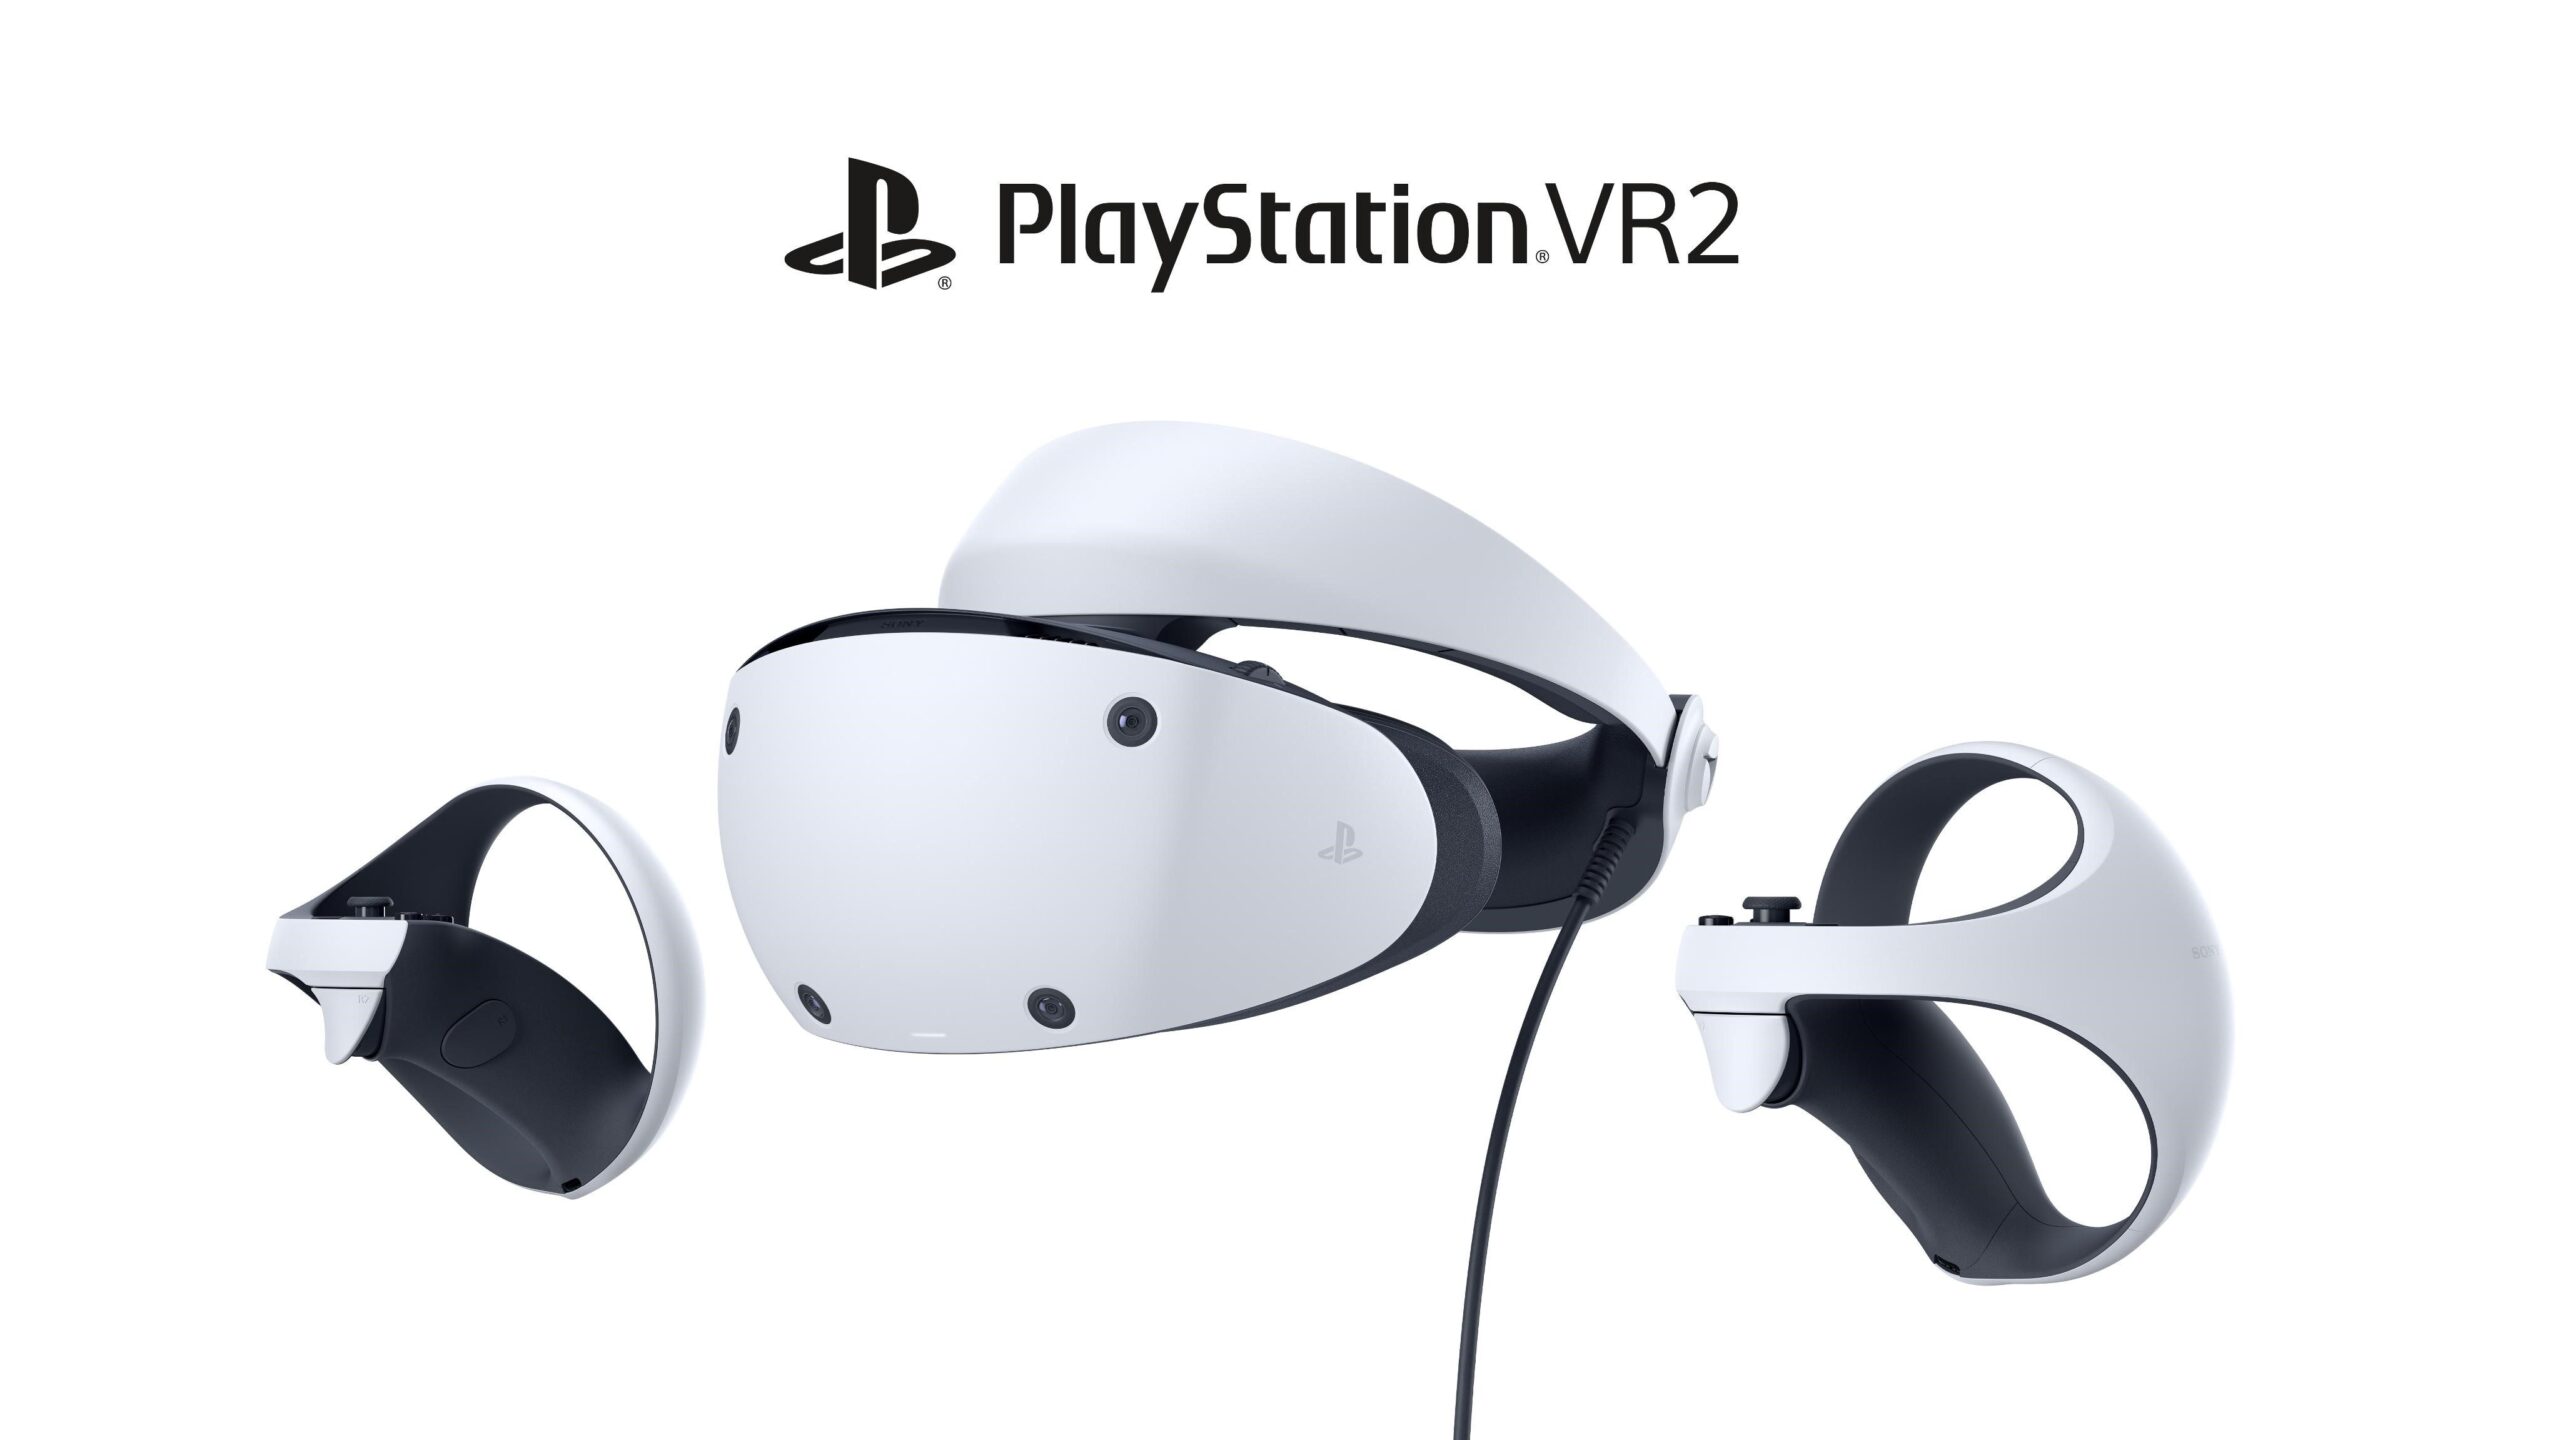 Sony Plans PC VR Compatibility for PSVR 2 Later This Year